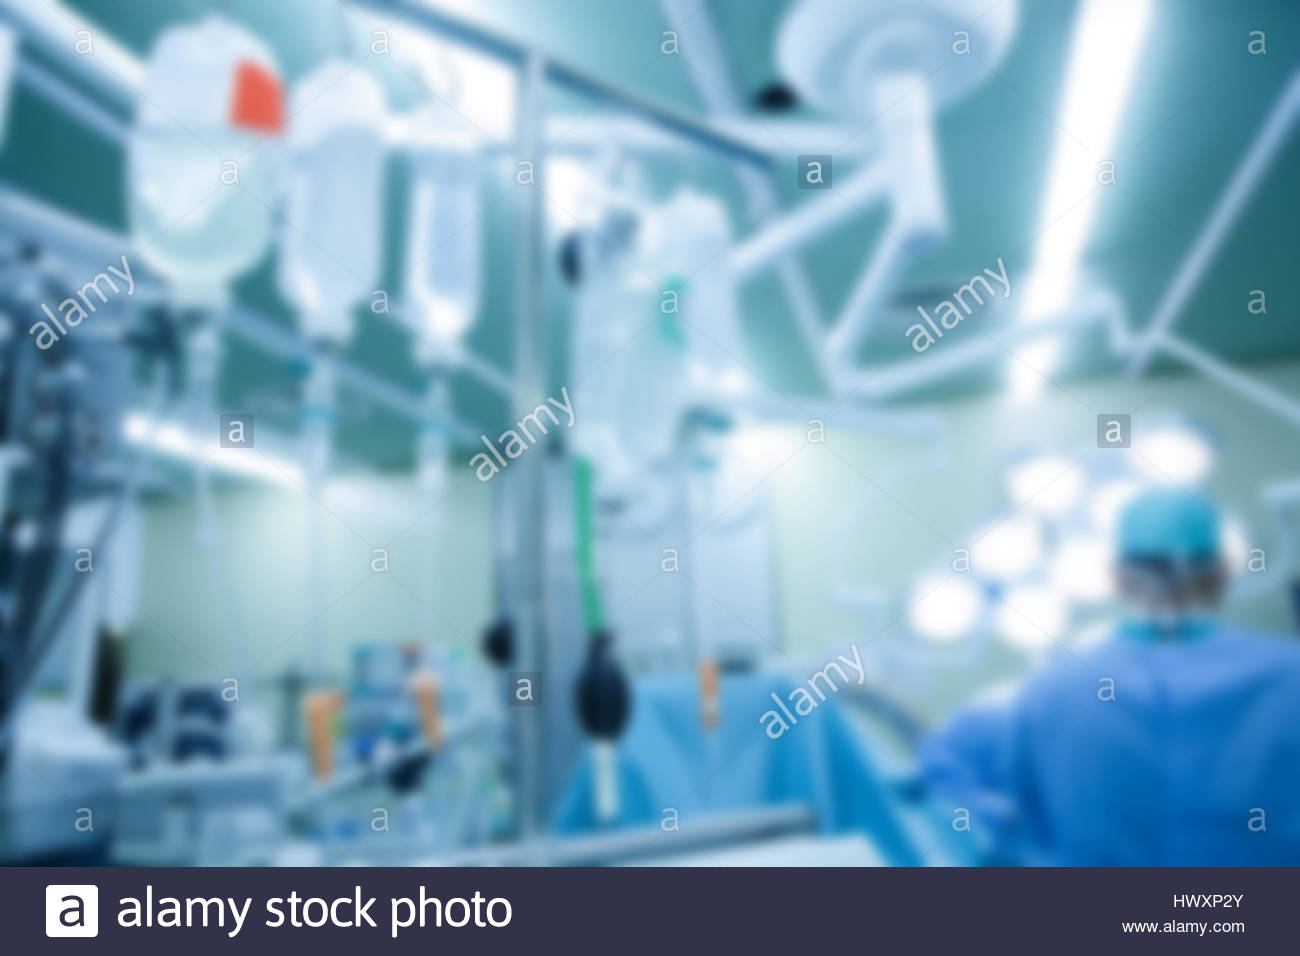 Abstract Blurry Medical Background With Iv Bags And Bottles